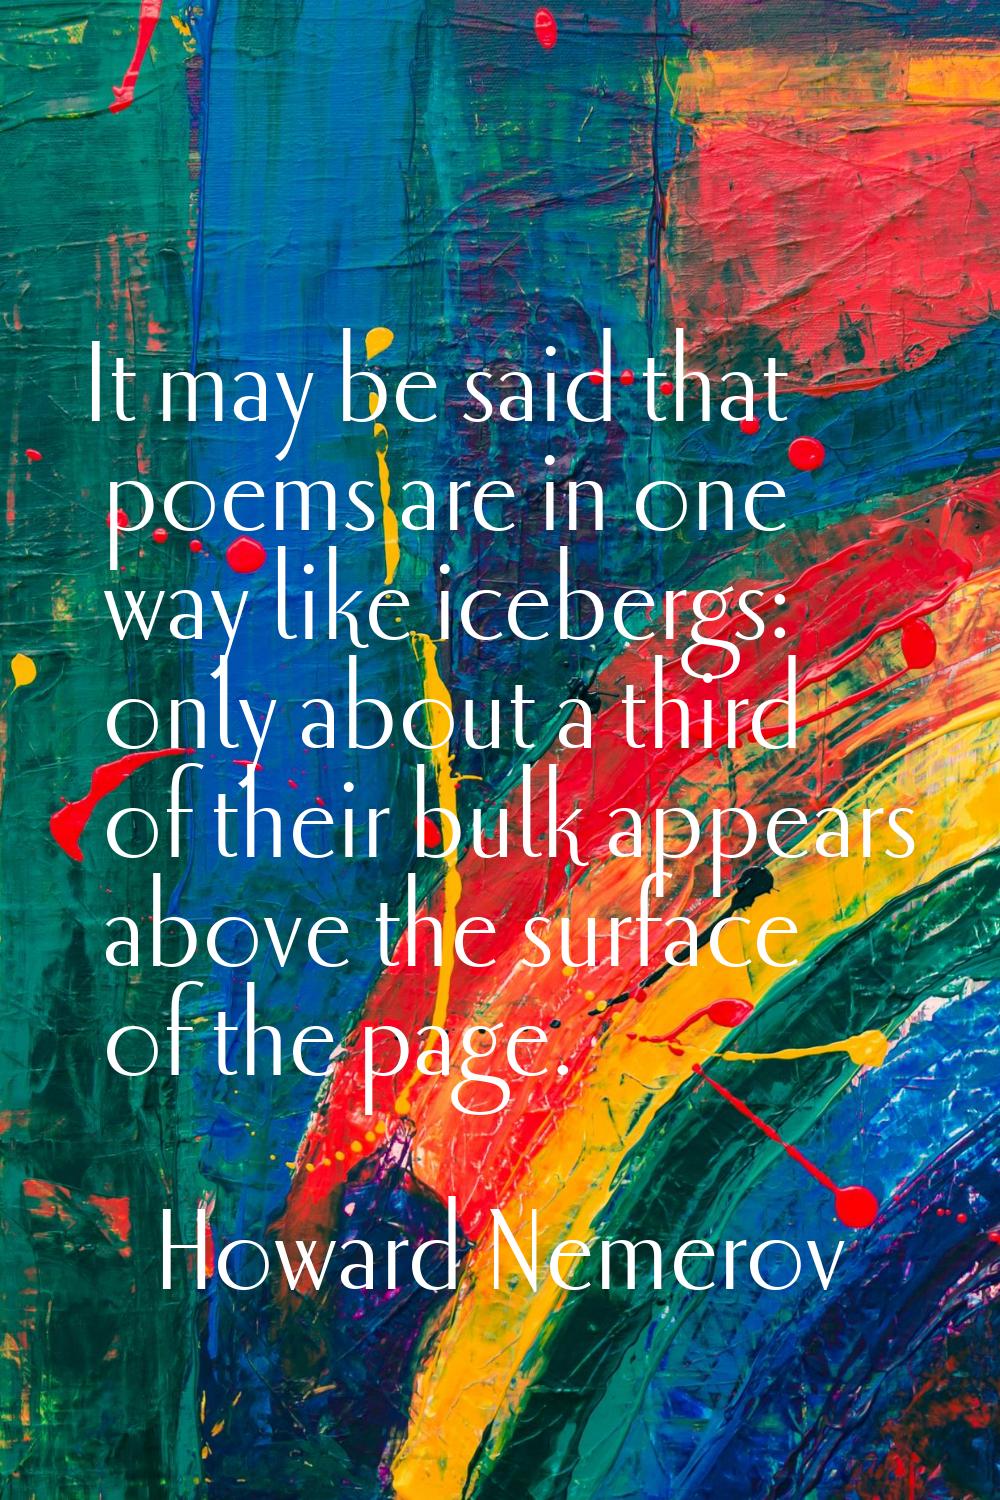 It may be said that poems are in one way like icebergs: only about a third of their bulk appears ab